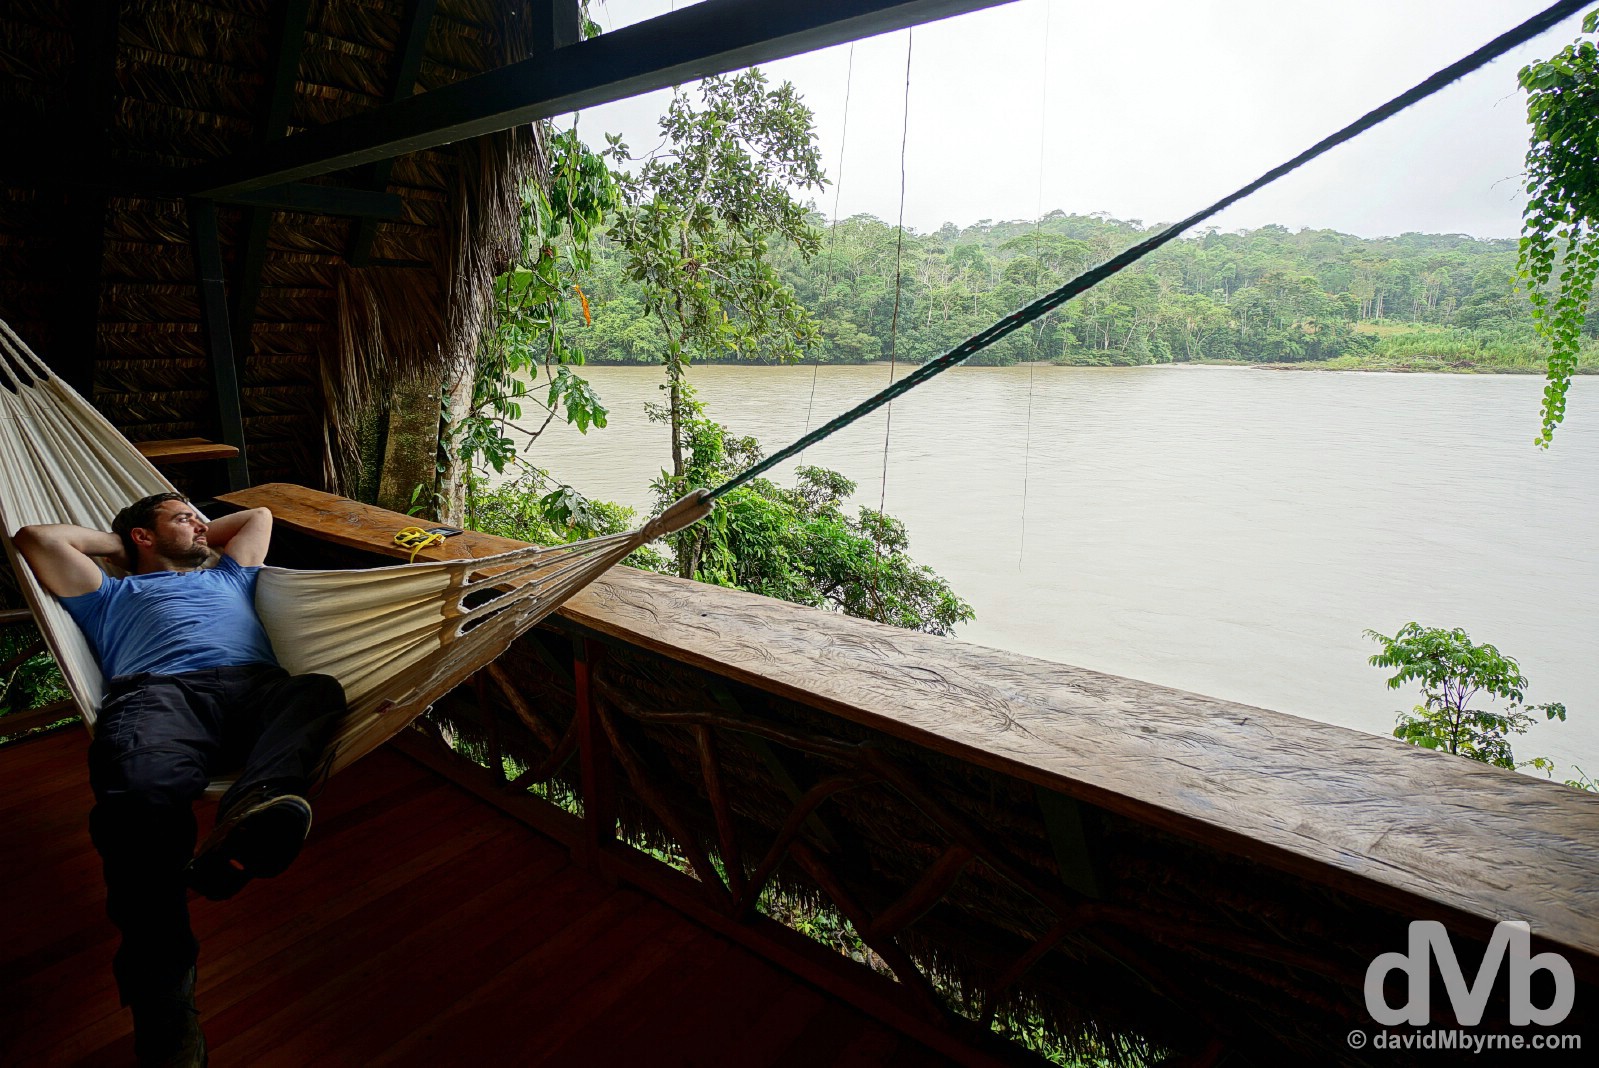 Relaxing overlooking the Napo River from Lodge 13 of Cotococha Amazon Lodge, Ecuador. July 12, 2015.